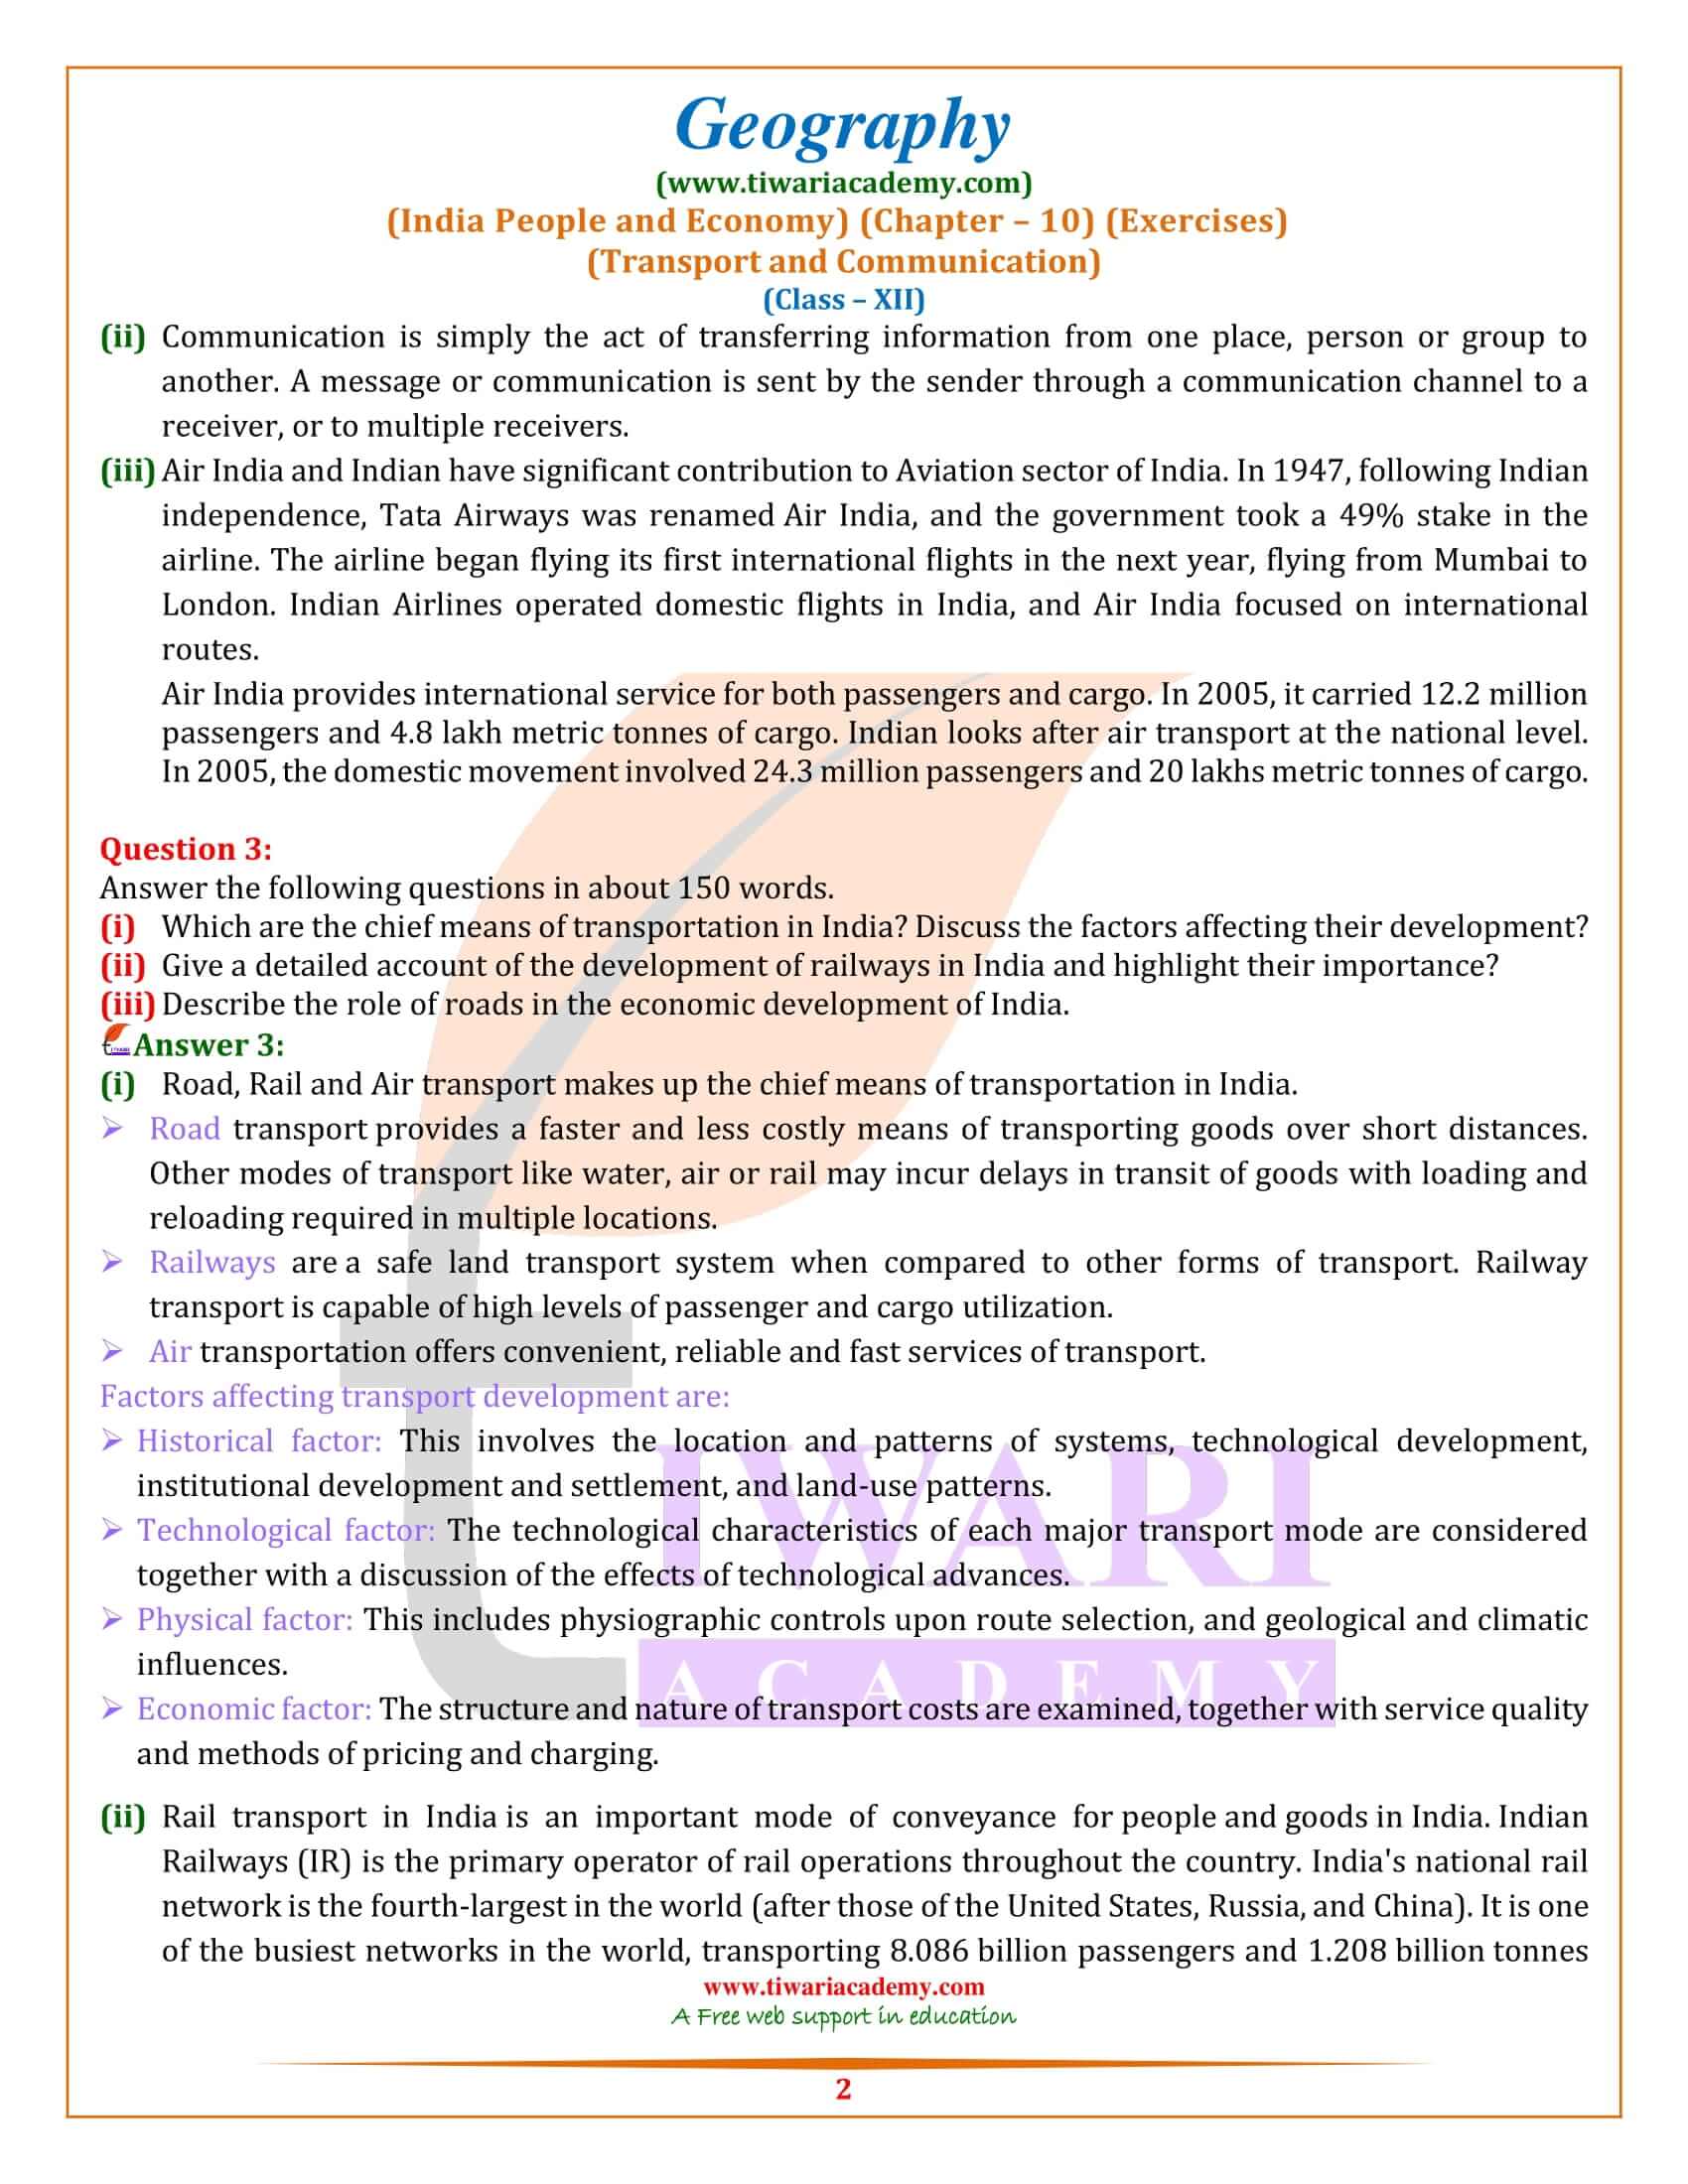 NCERT Solutions for Class 12 Geography Chapter 10 in English Medium